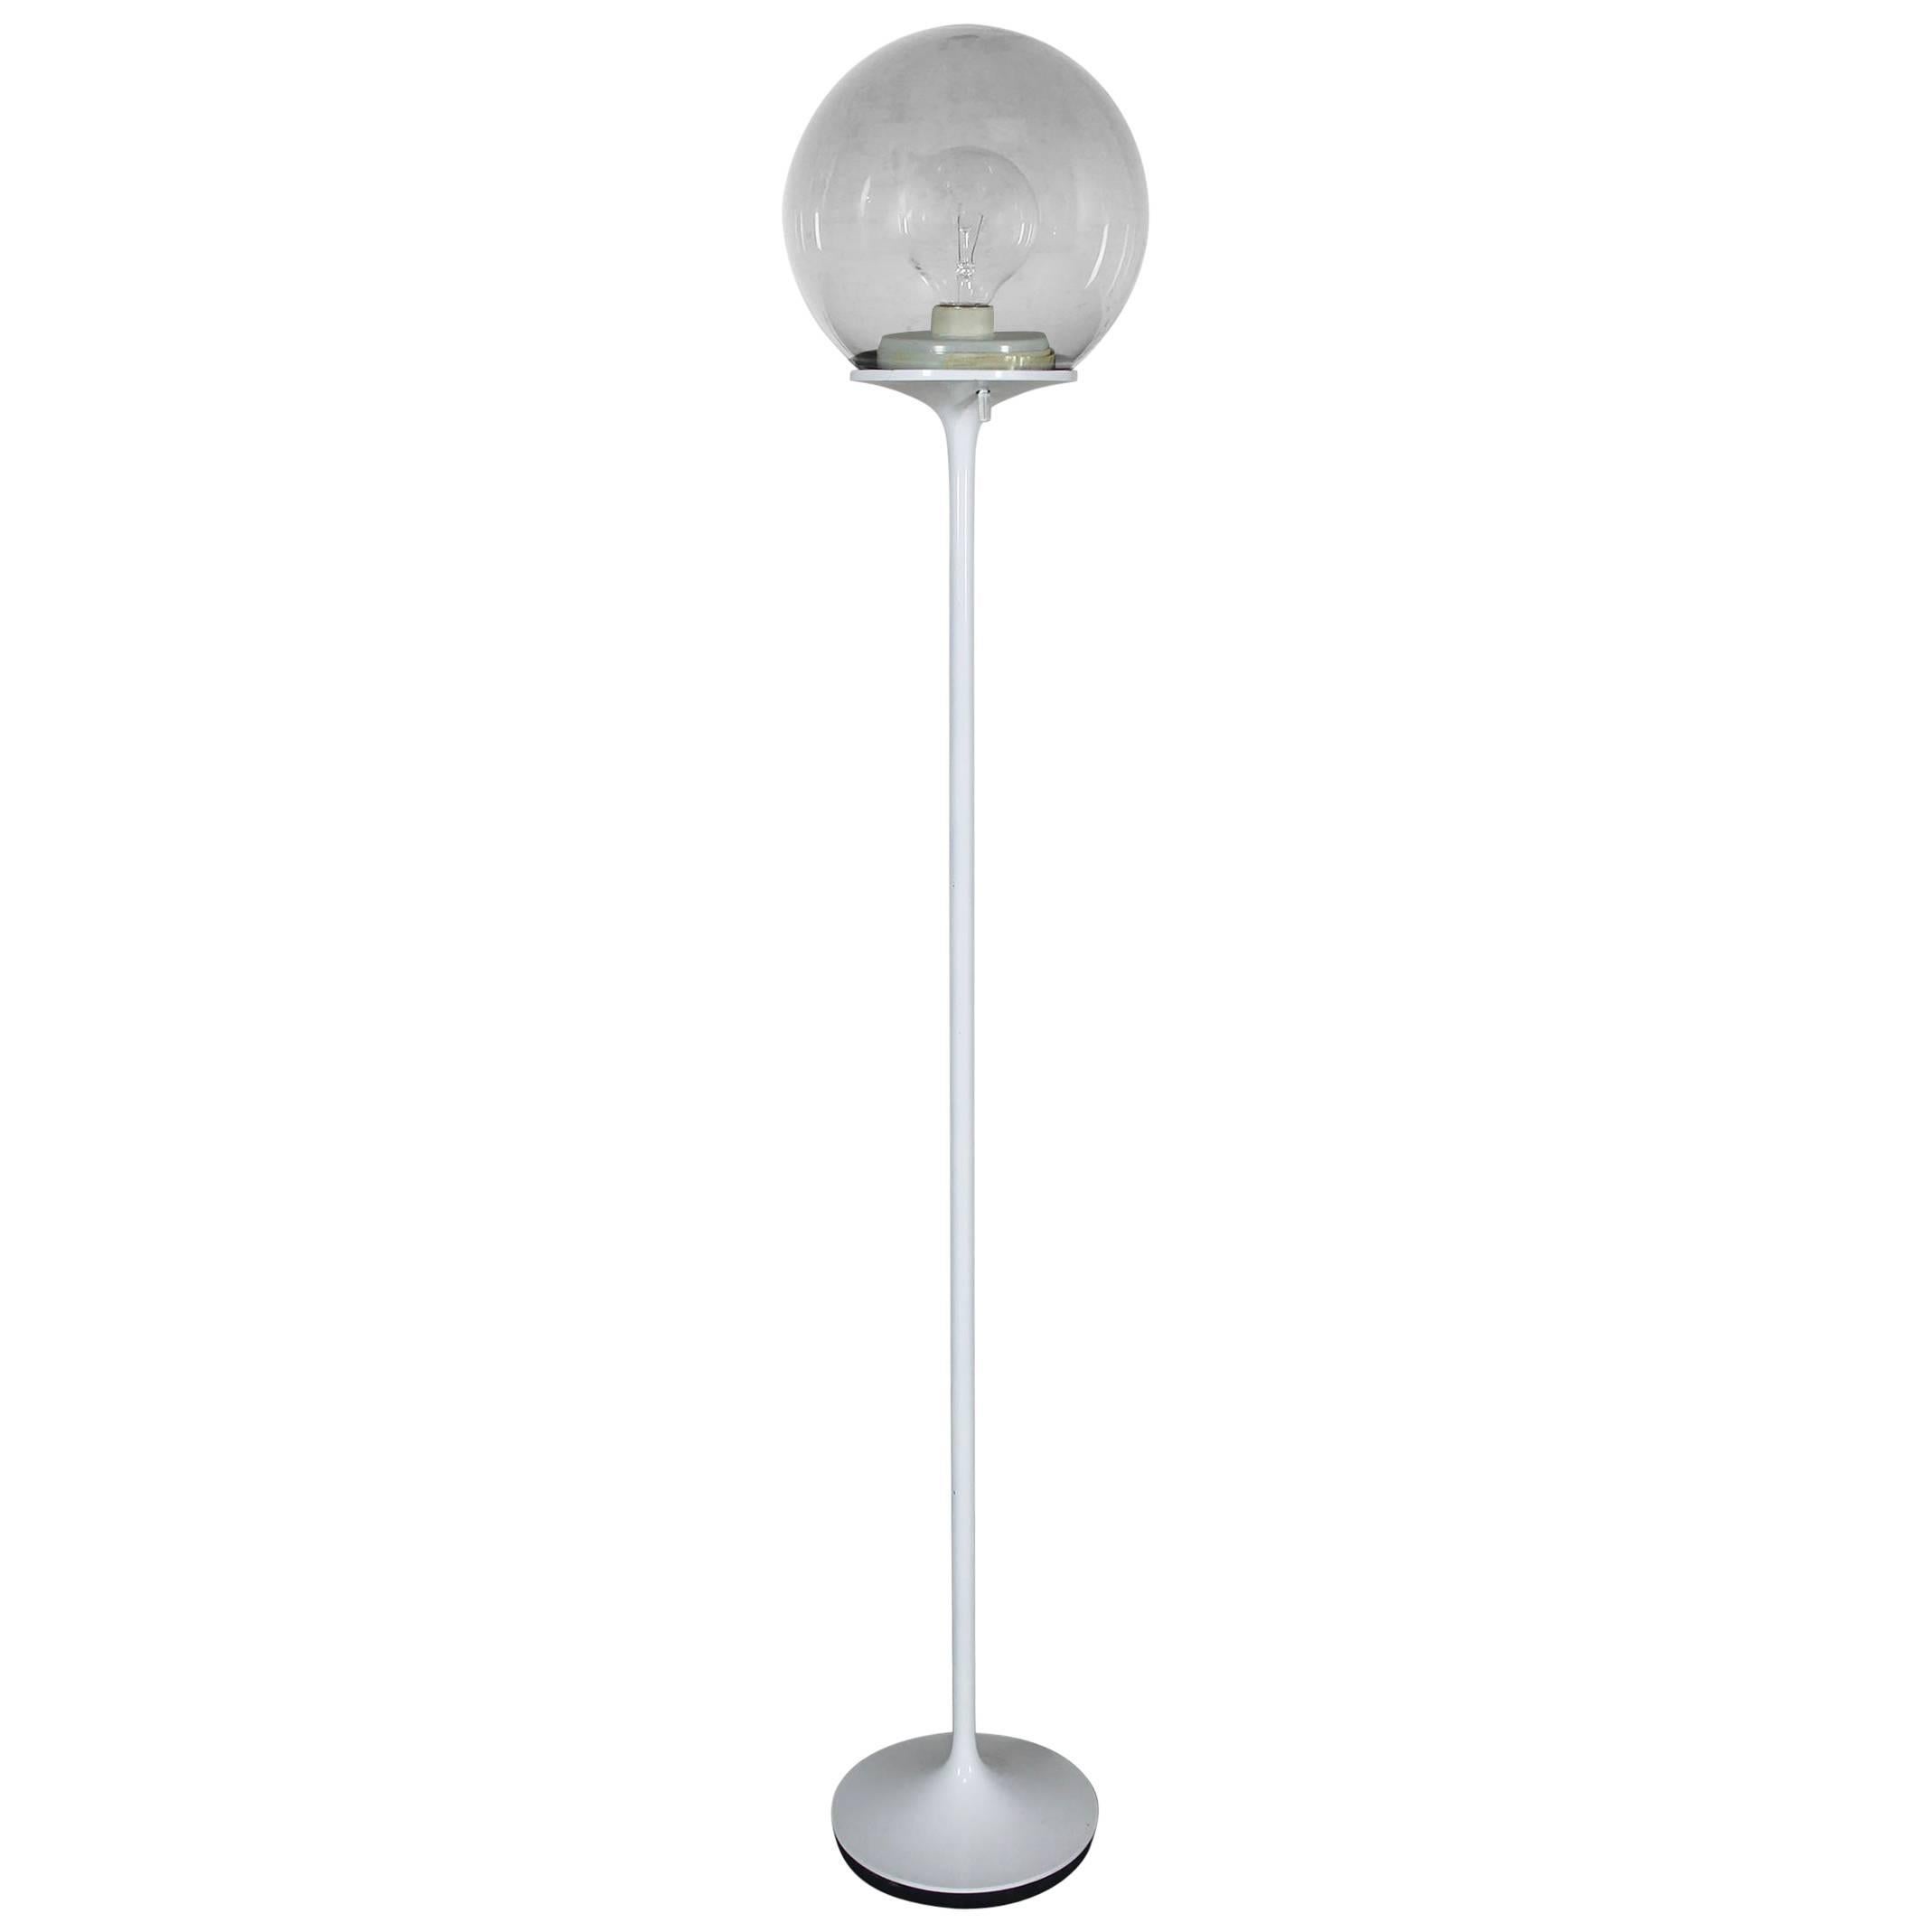 Stemlite Floor Lamp by Billy Curry for Design Line White with Smoke Glass Globe